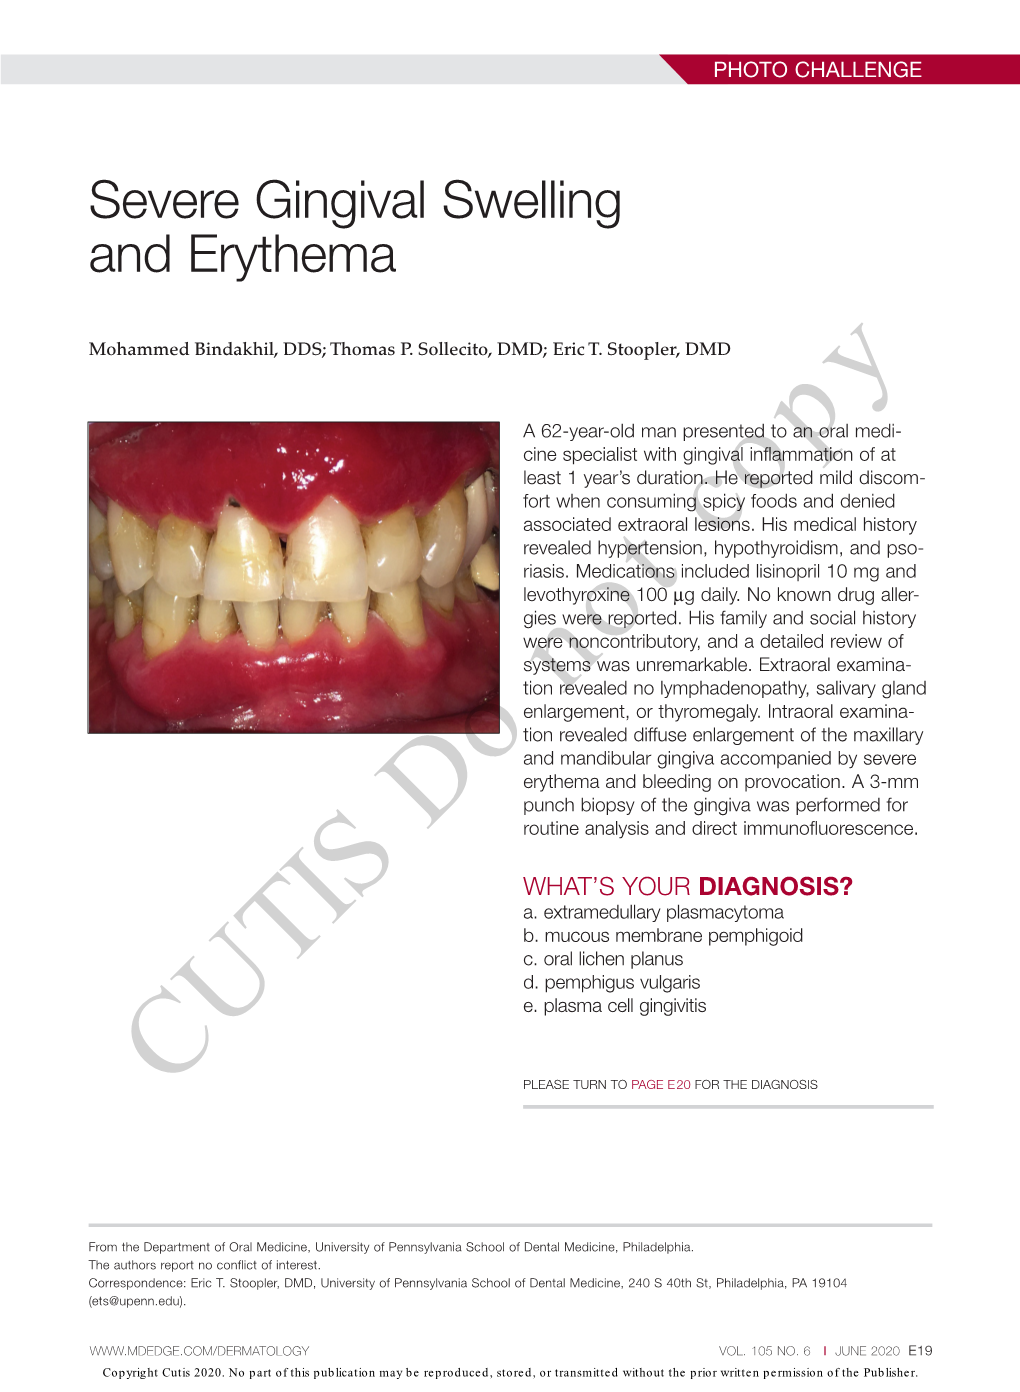 Severe Gingival Swelling and Erythema